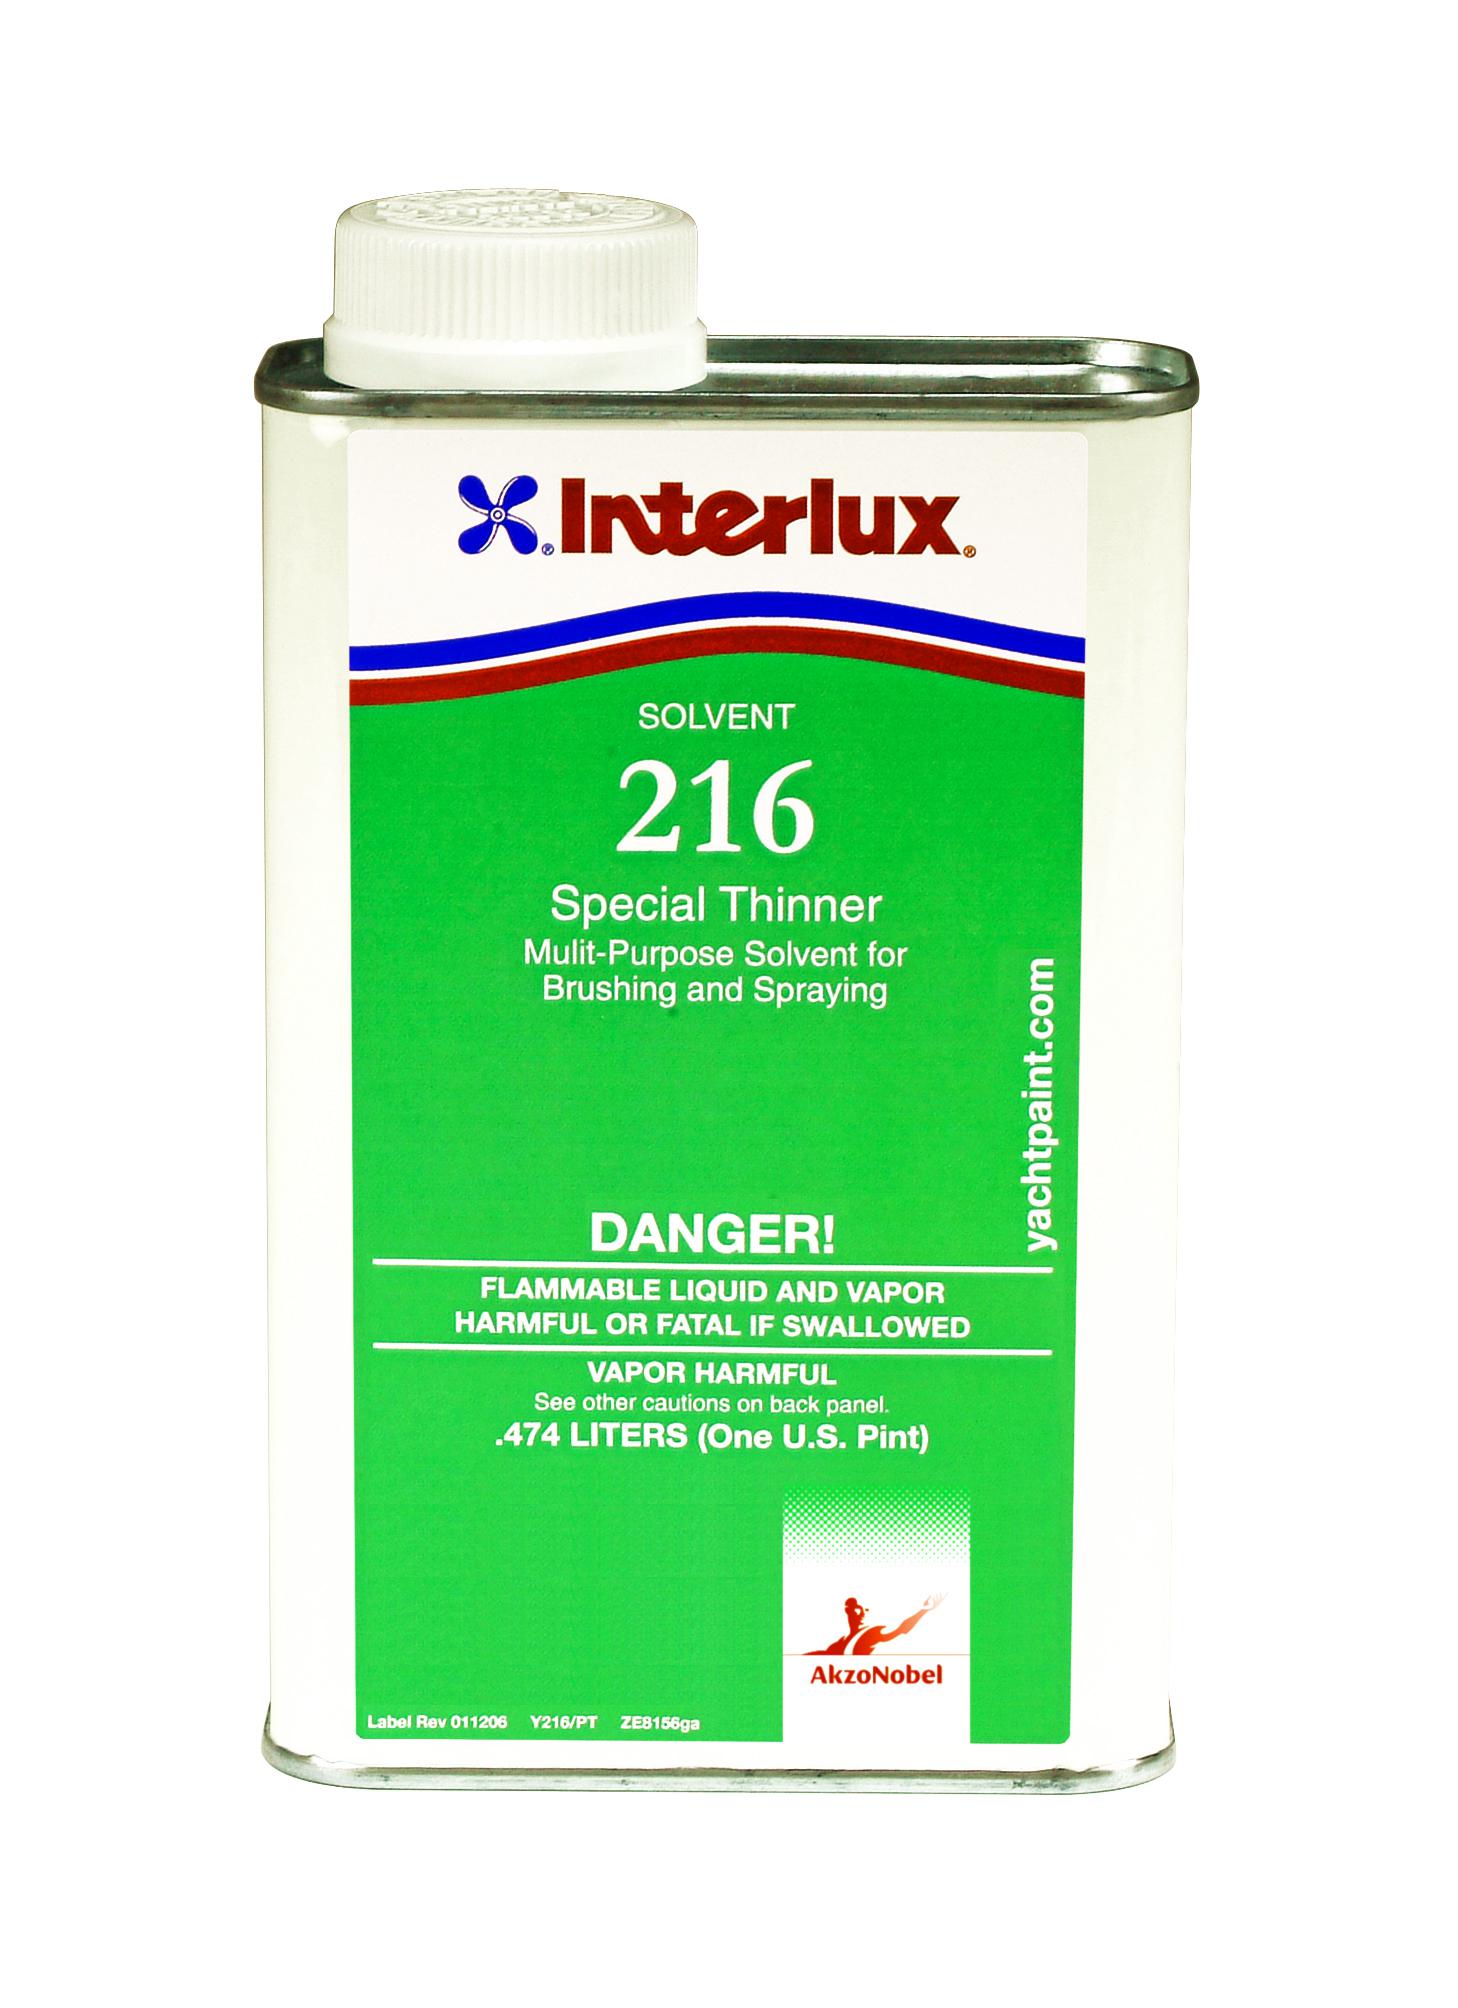 Interlux boat paint special thinner solvent 216 pint